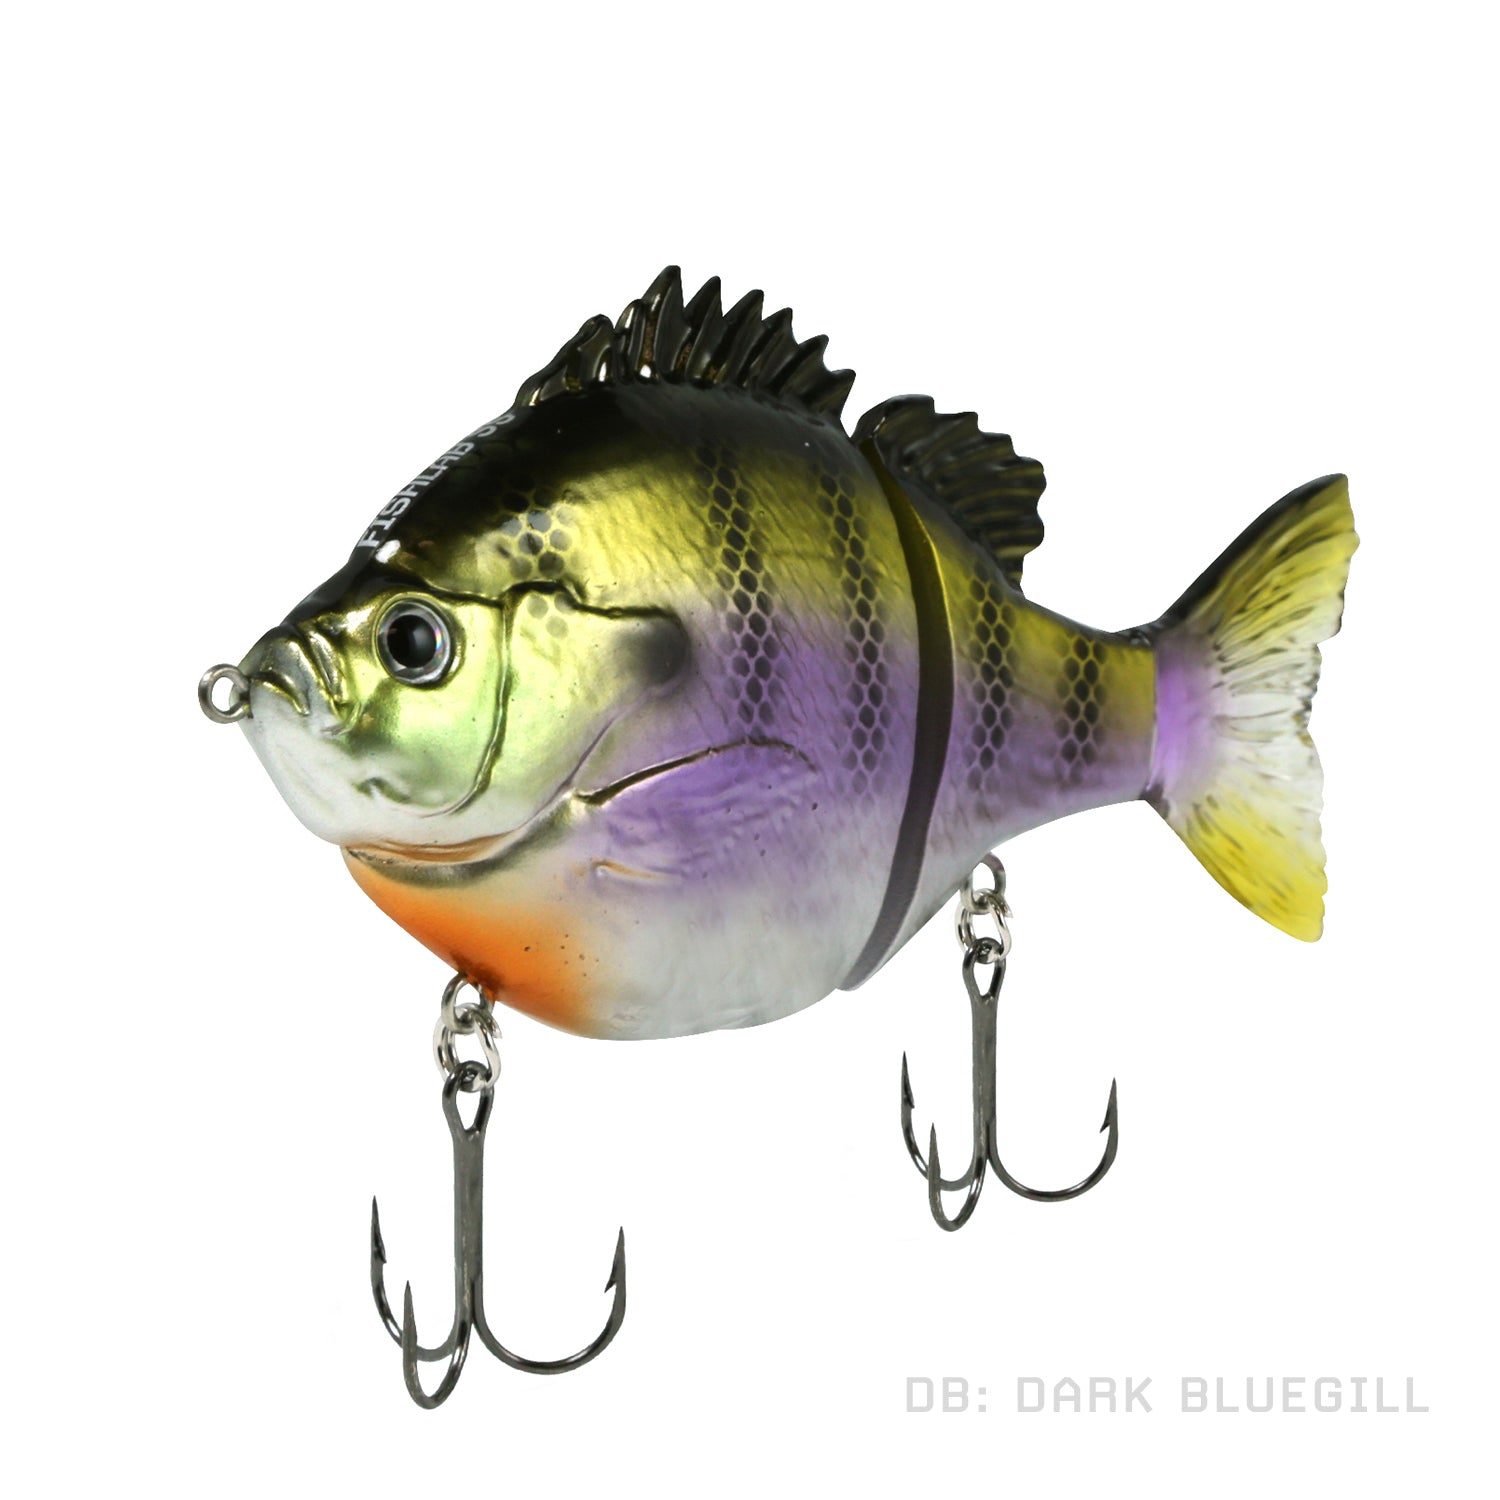 ODS Lure Bluegill Glide Bait Topwater Fishing Lure Floating Swimbait for Bass Trout Perch Pike Walleye Fishing